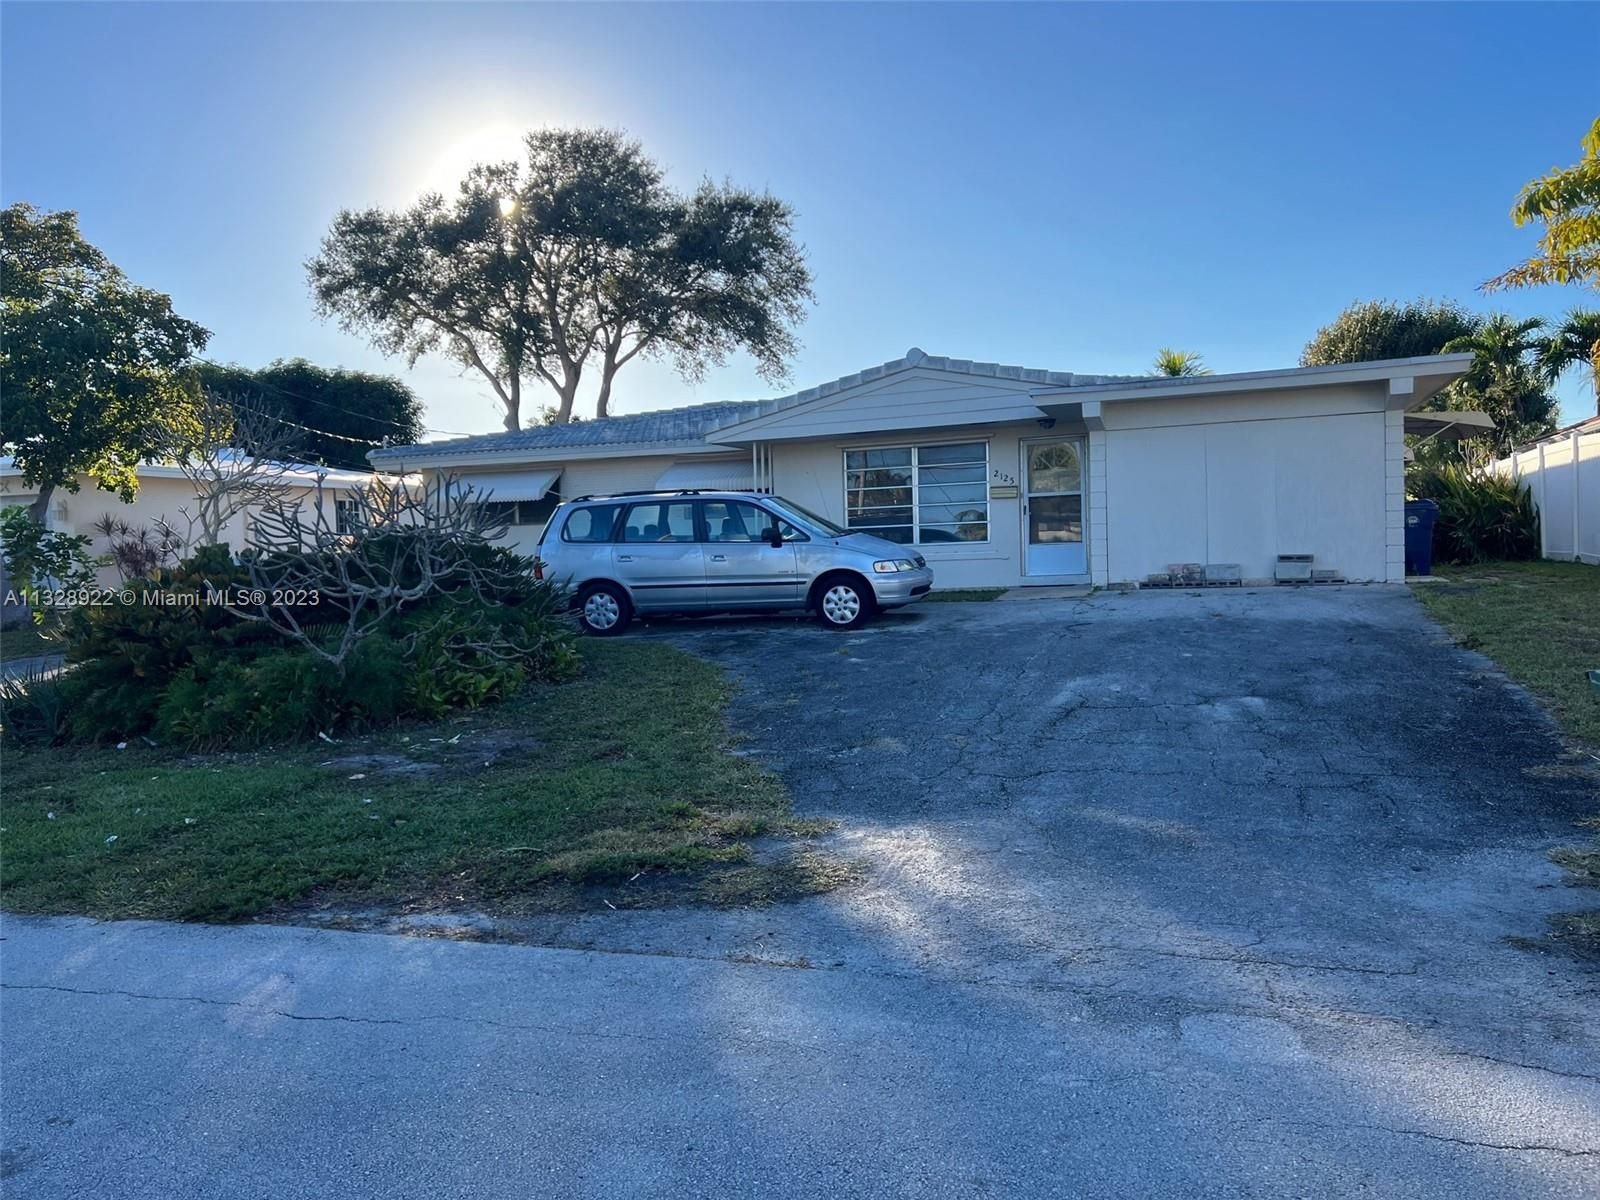 Real estate property located at 2125 17th Ave, Broward County, Wilton Manors, FL